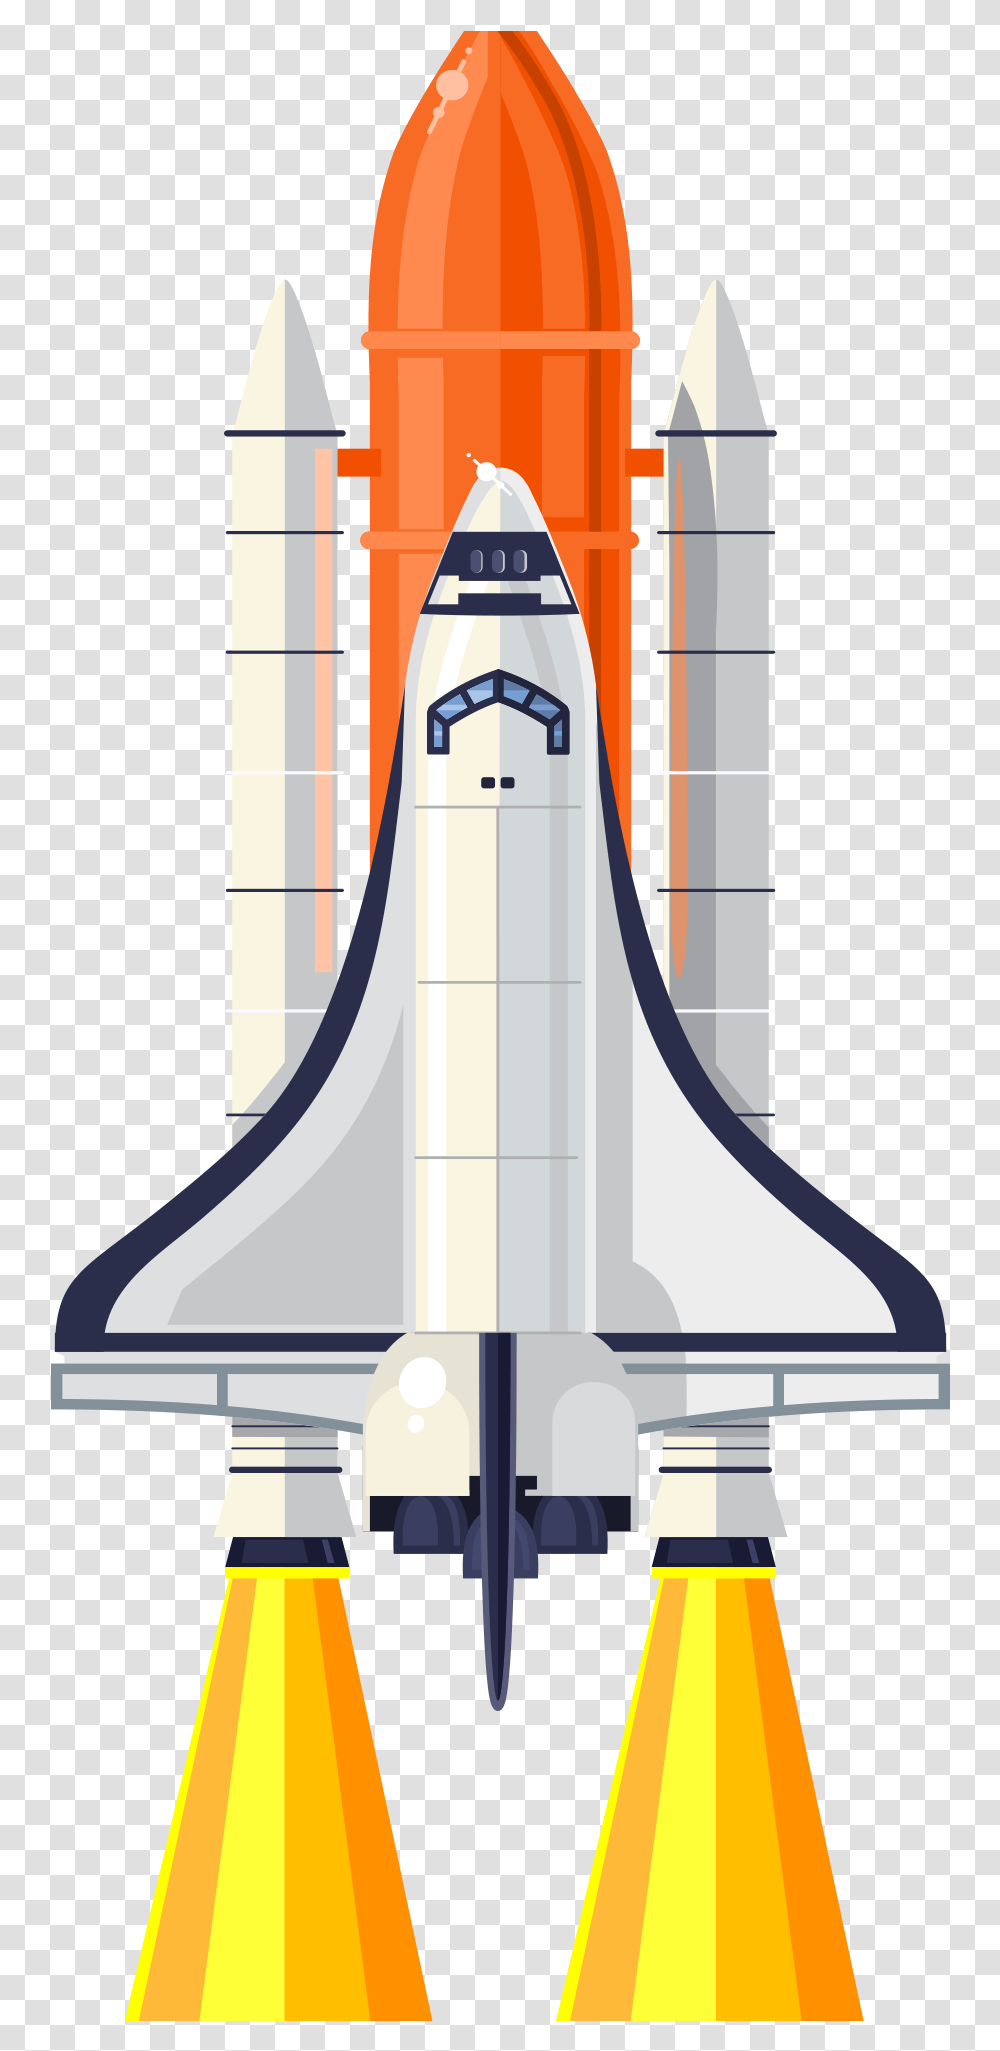 Rocket Clipart Image Free Download Space Rocket, Architecture, Building, Tower, Spire Transparent Png